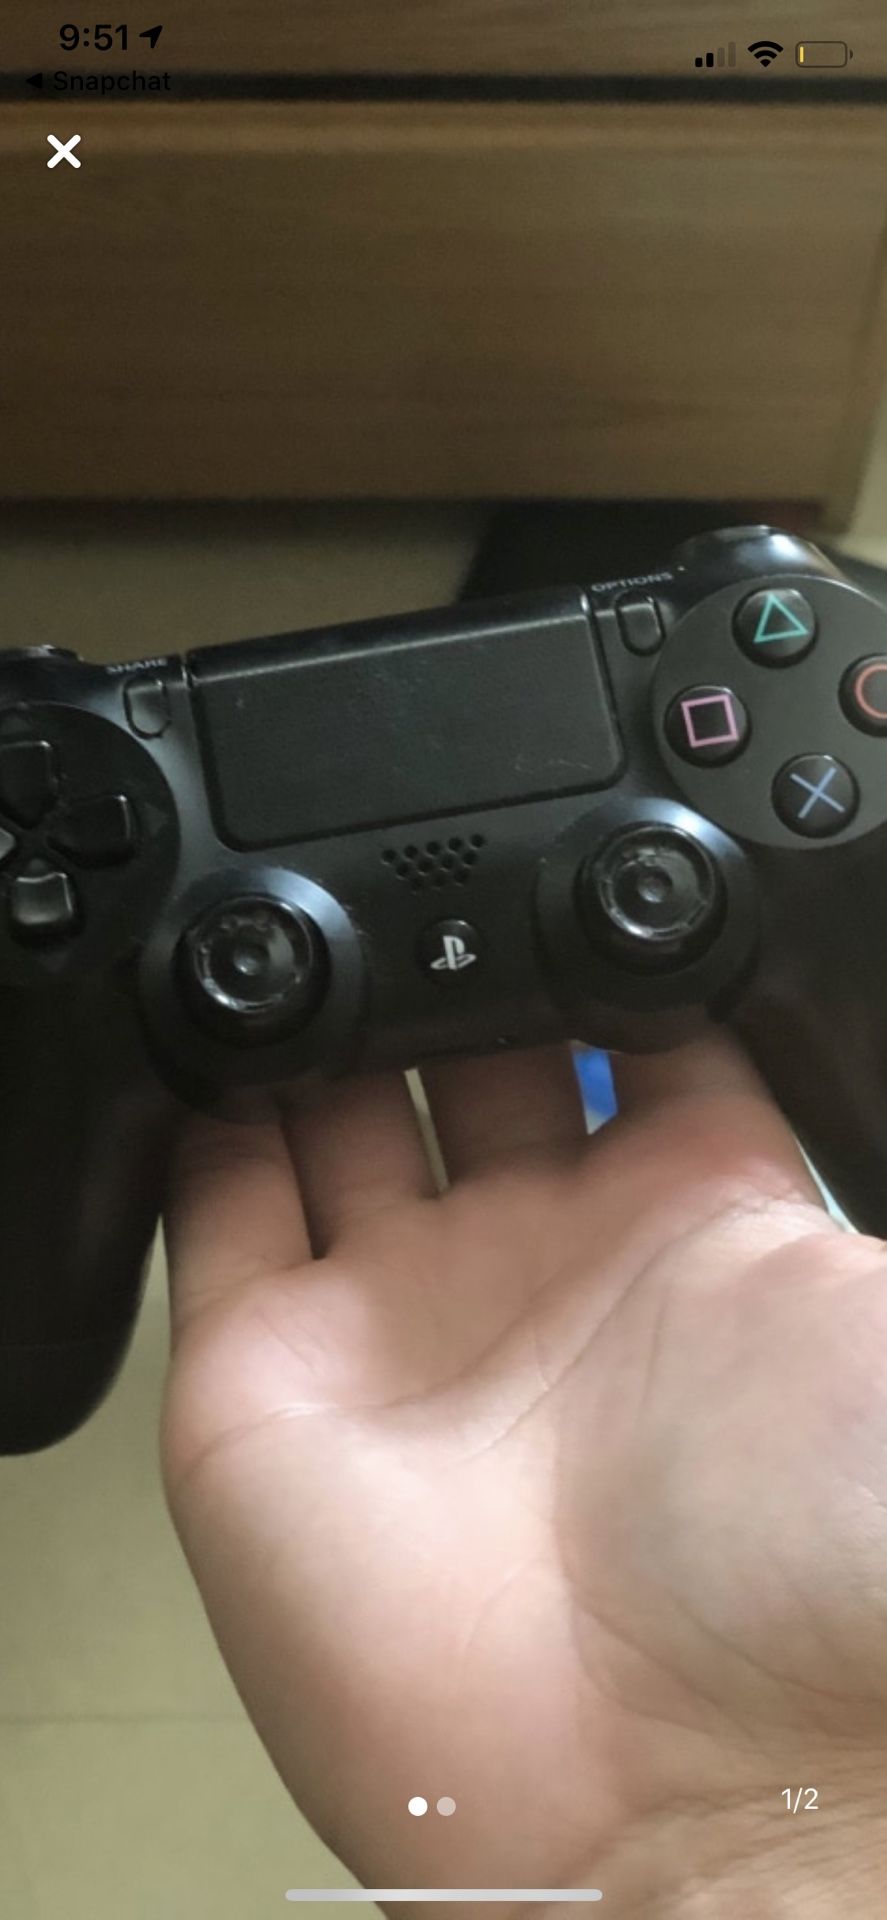 Ps4 controller - works Perfectly